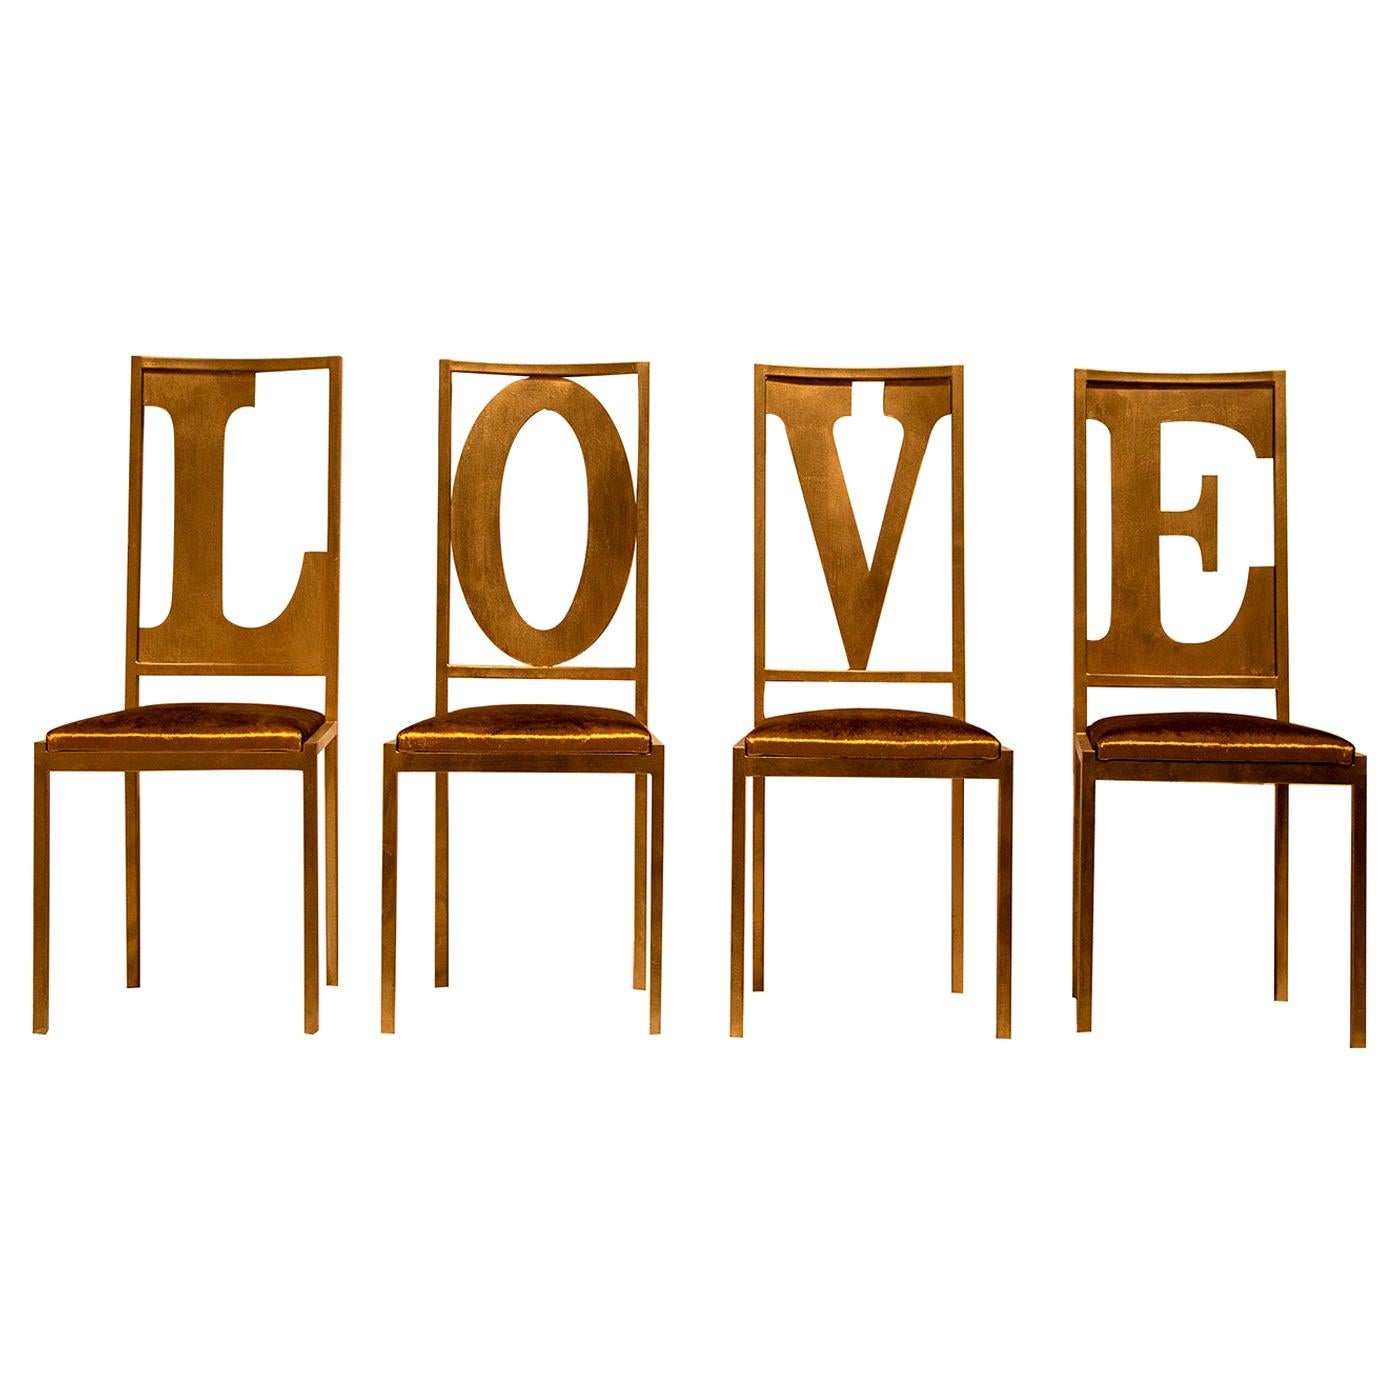 Gold Love Set of 4 Letter Chairs For Sale